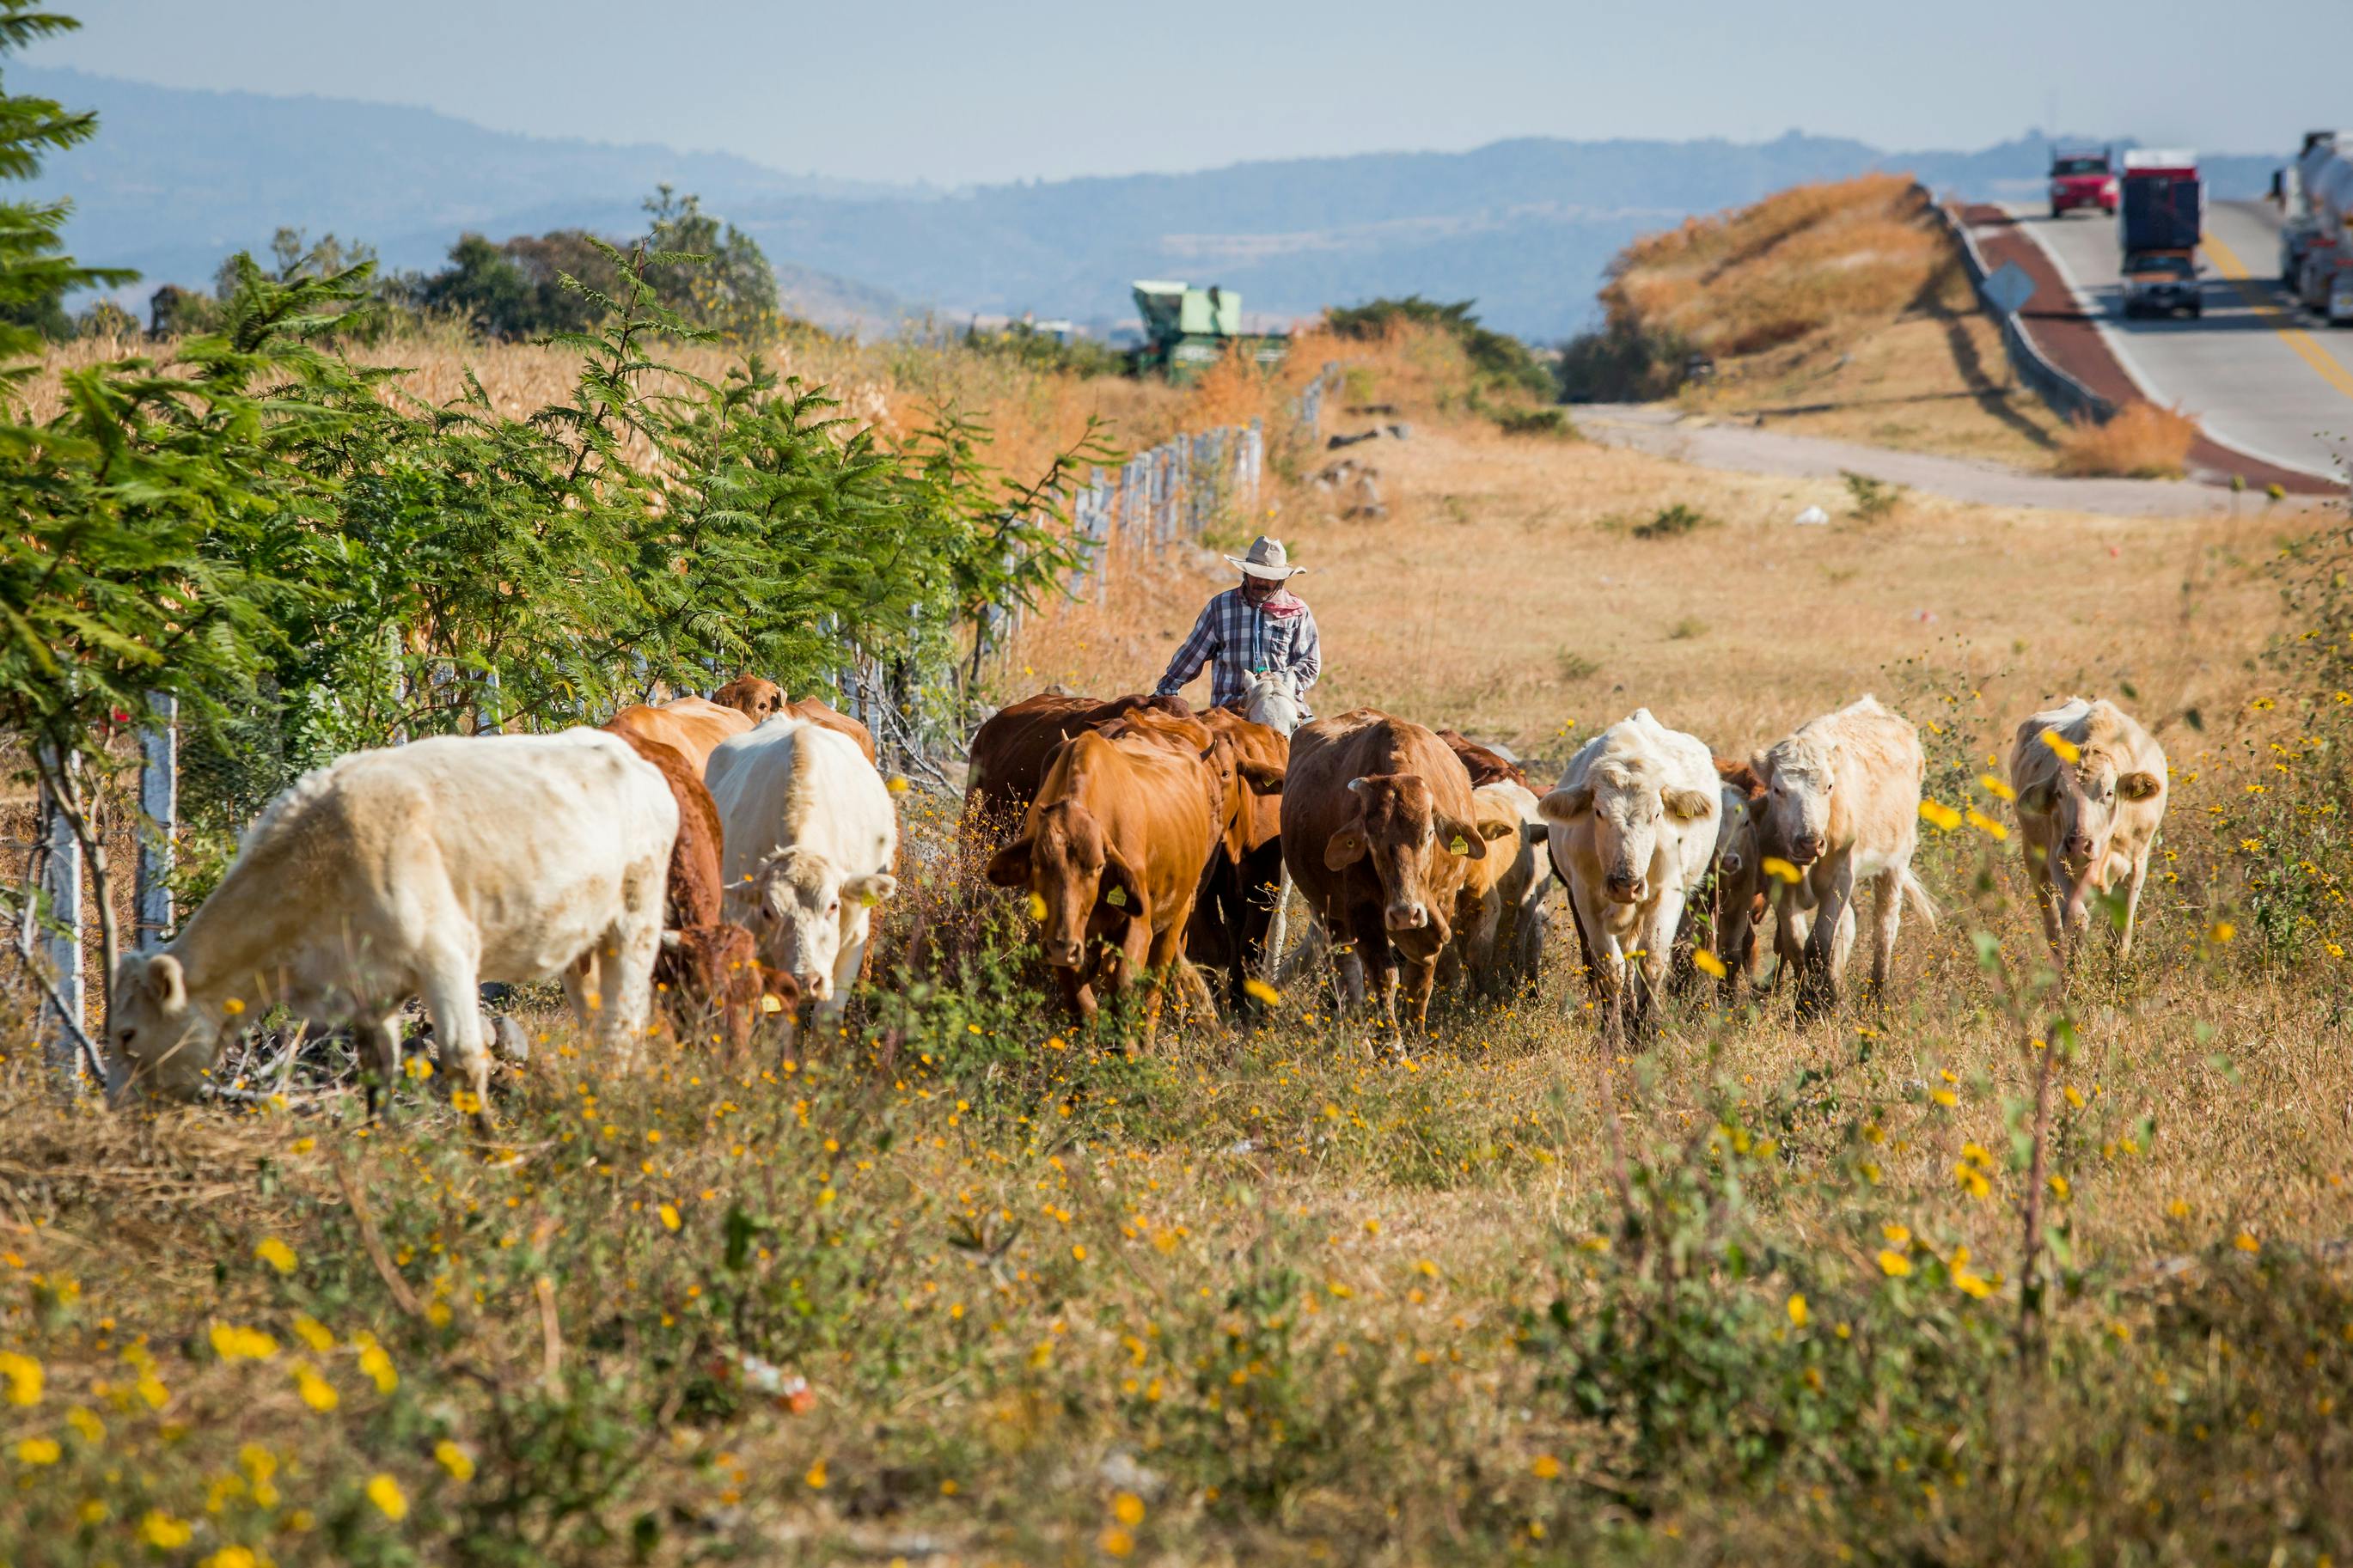 A ranch hand with cattle — cattle are grazing in the grass.